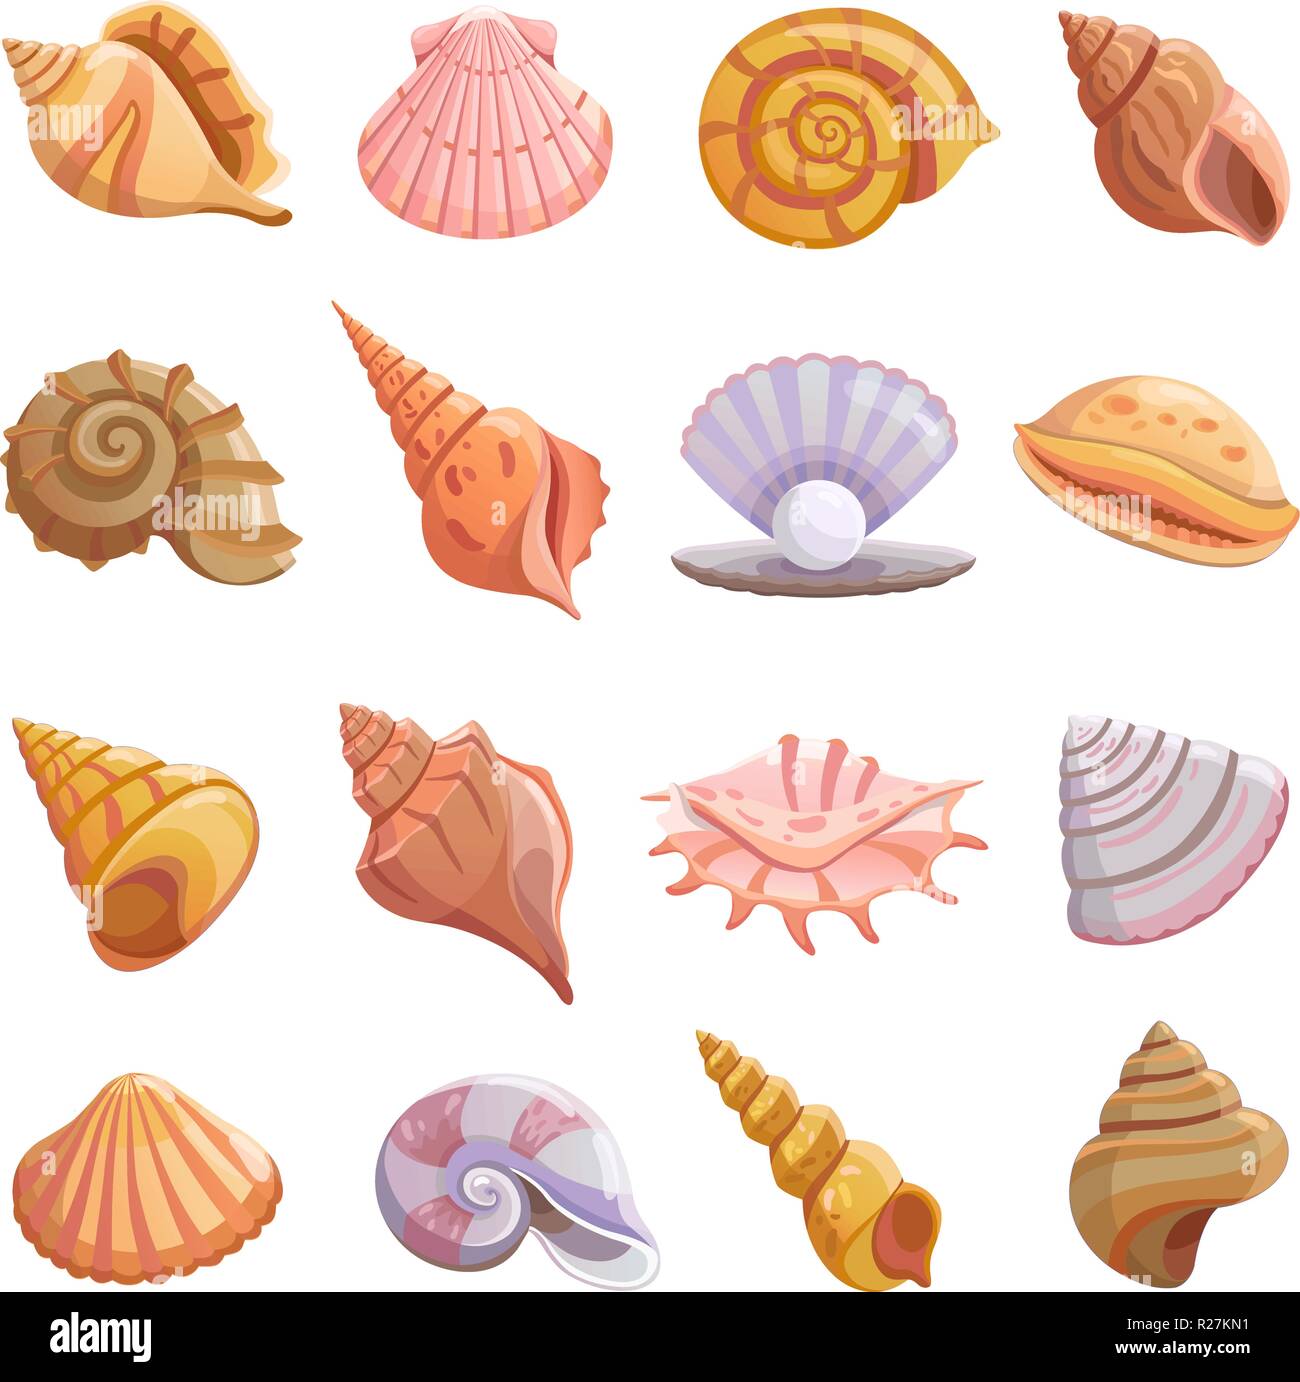 Cartoon shell Stock Vector Images - Alamy